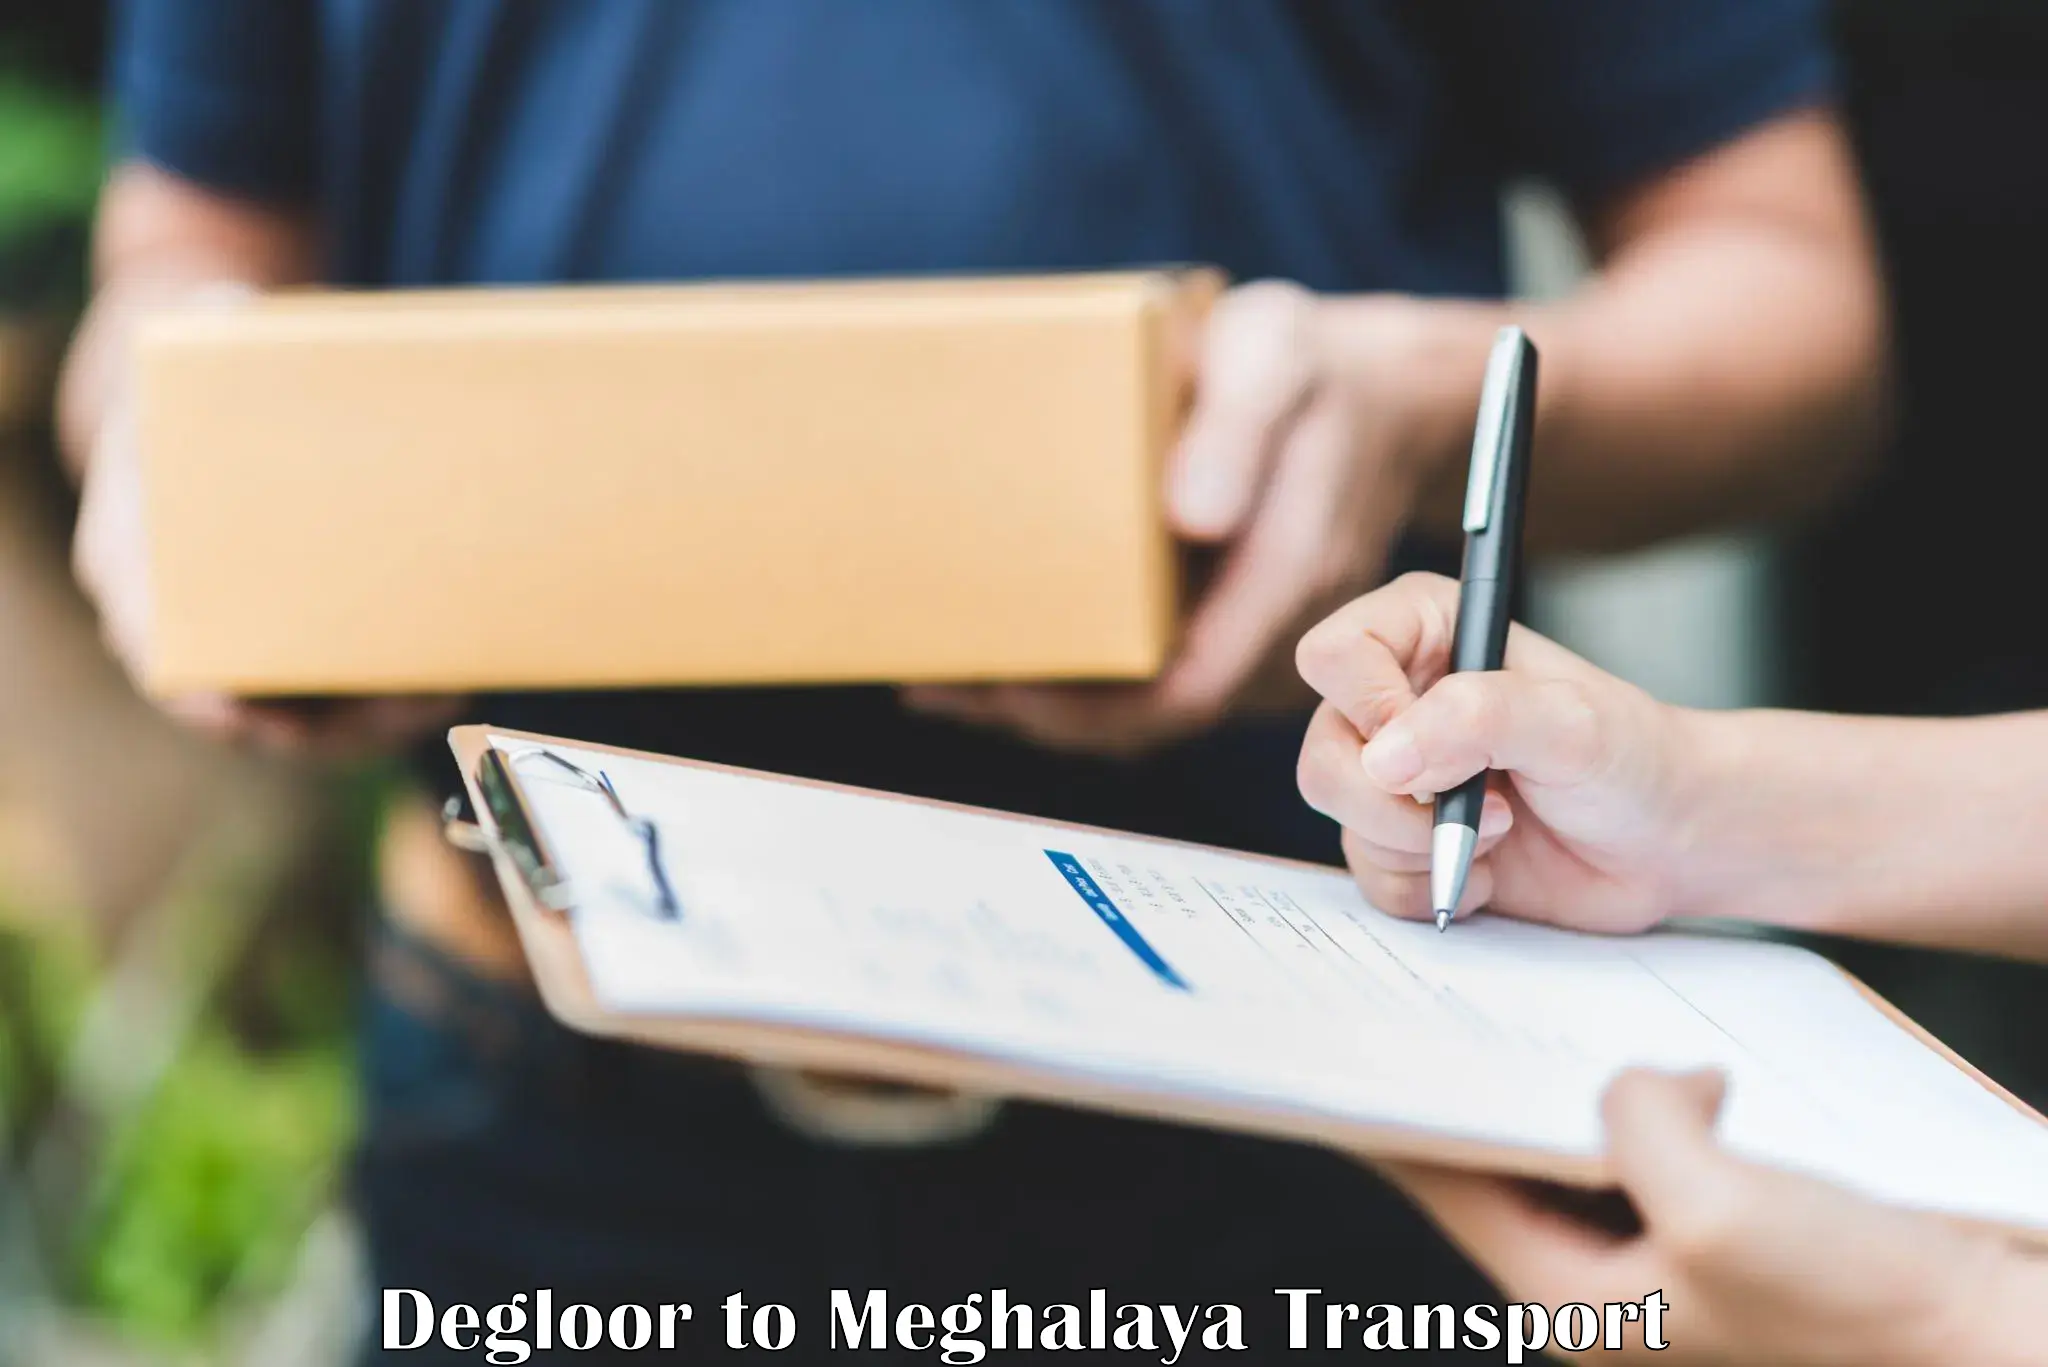 Air freight transport services Degloor to Dkhiah West